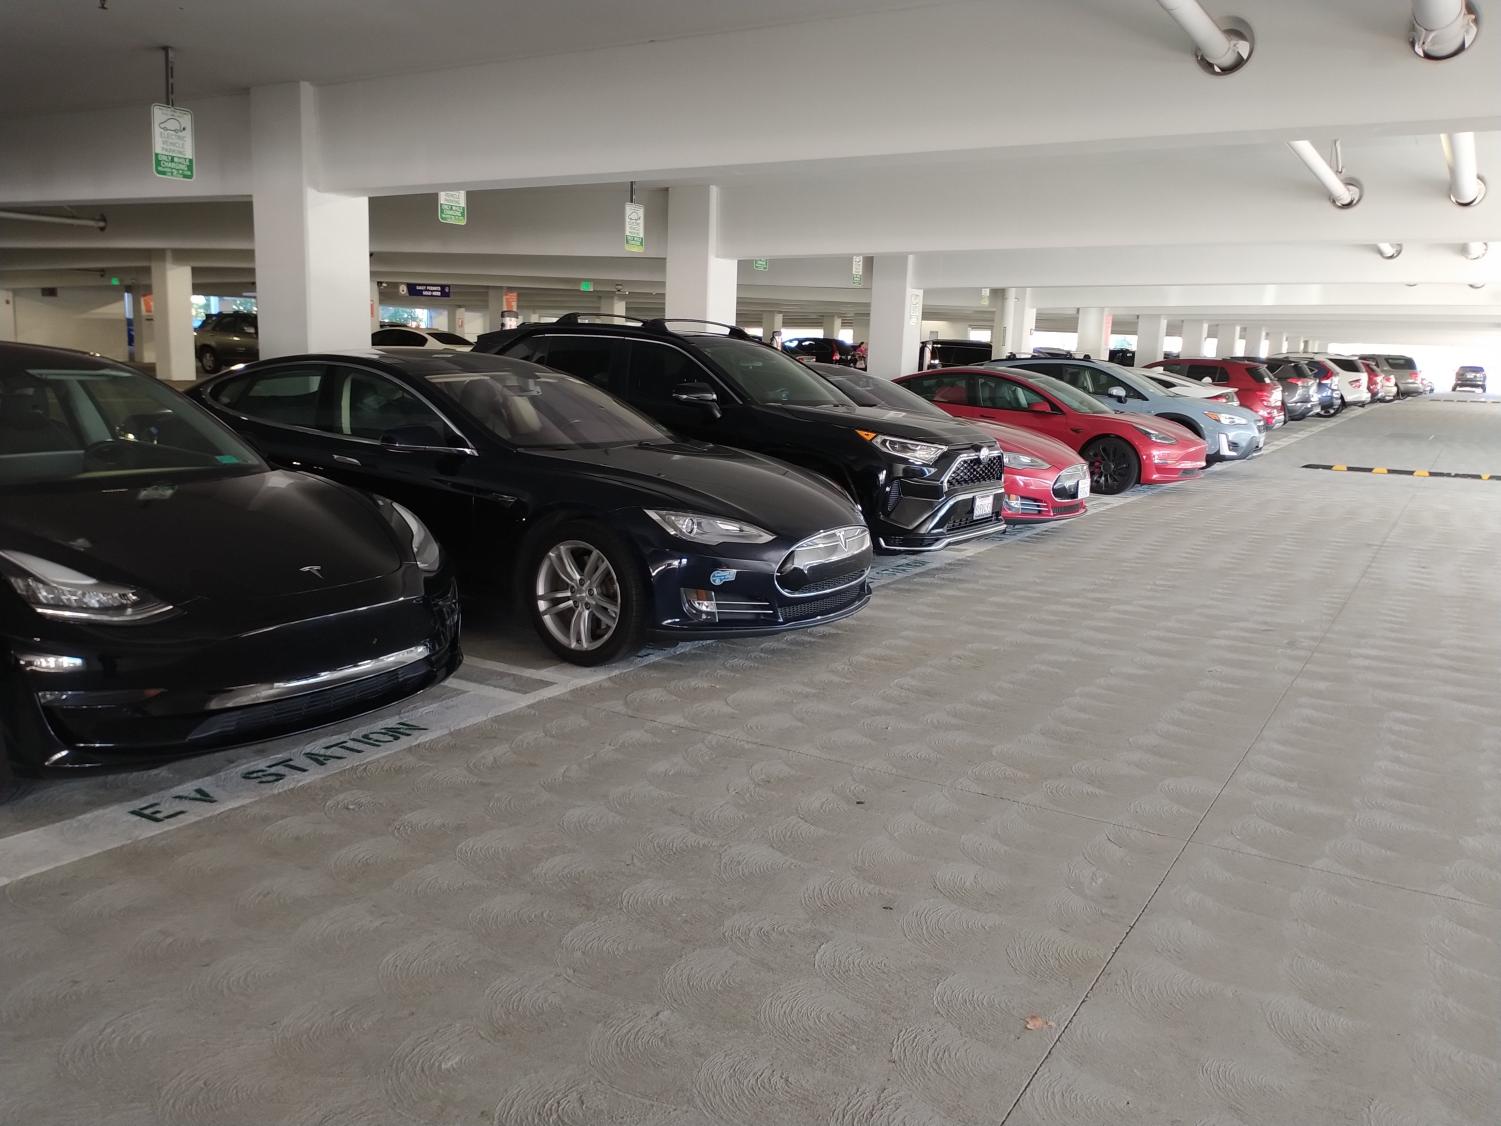 Electric vehicles charge in parking Lot C at El Camino on Nov. 15. Campus Security and Access Technician Mitchell Kekauoha said "There has not been any talk" about installing more chargers on campus. (Anthony Lipari | The Union)